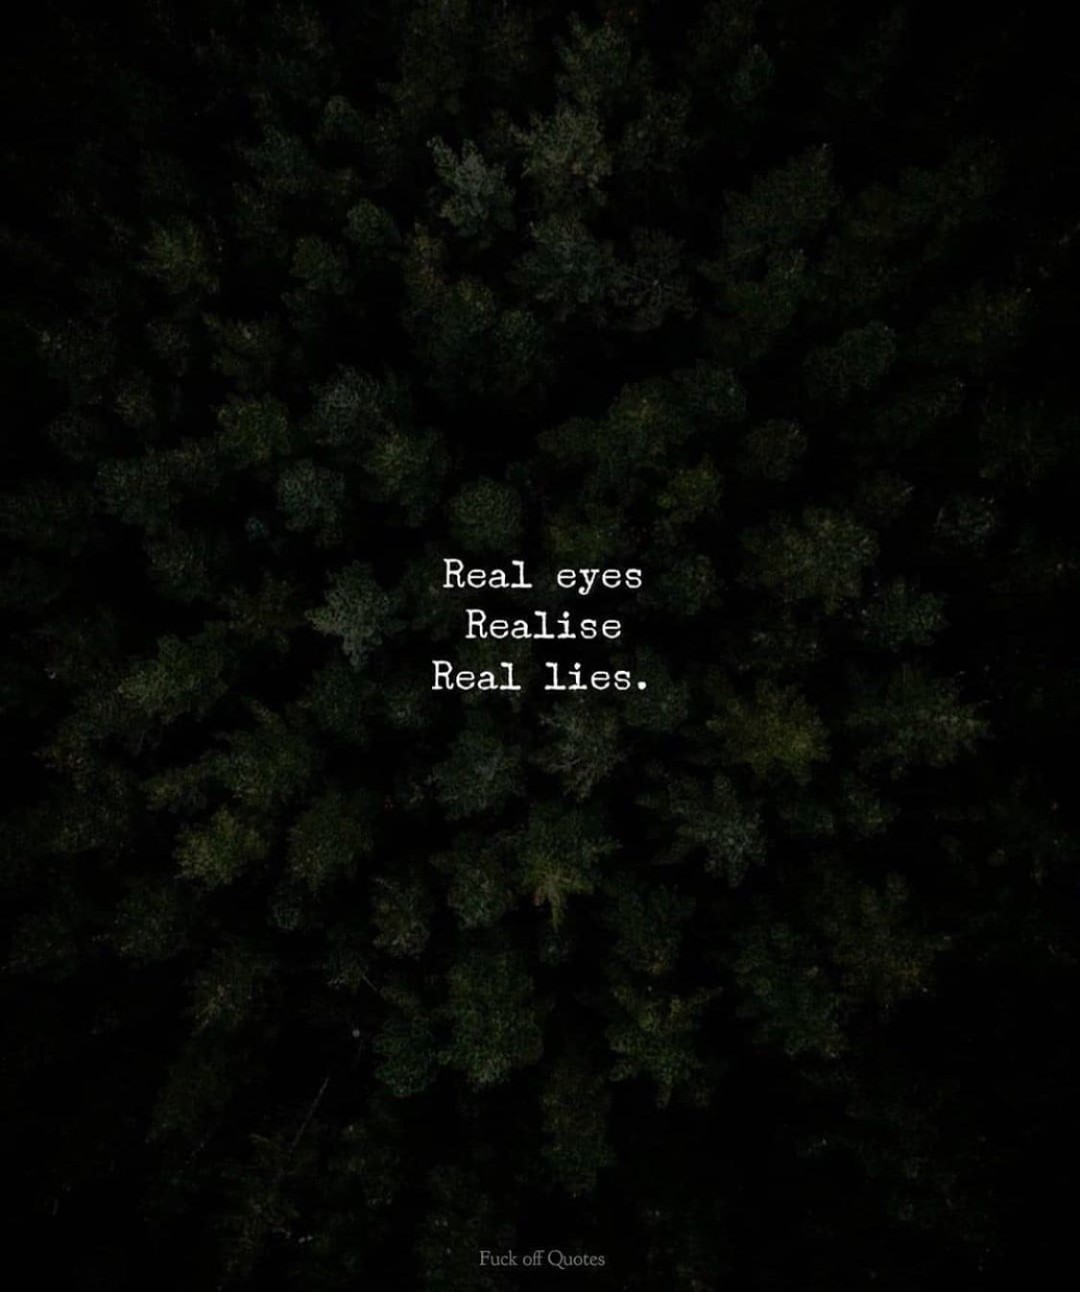 Real eyes realise real lies. - Phrases